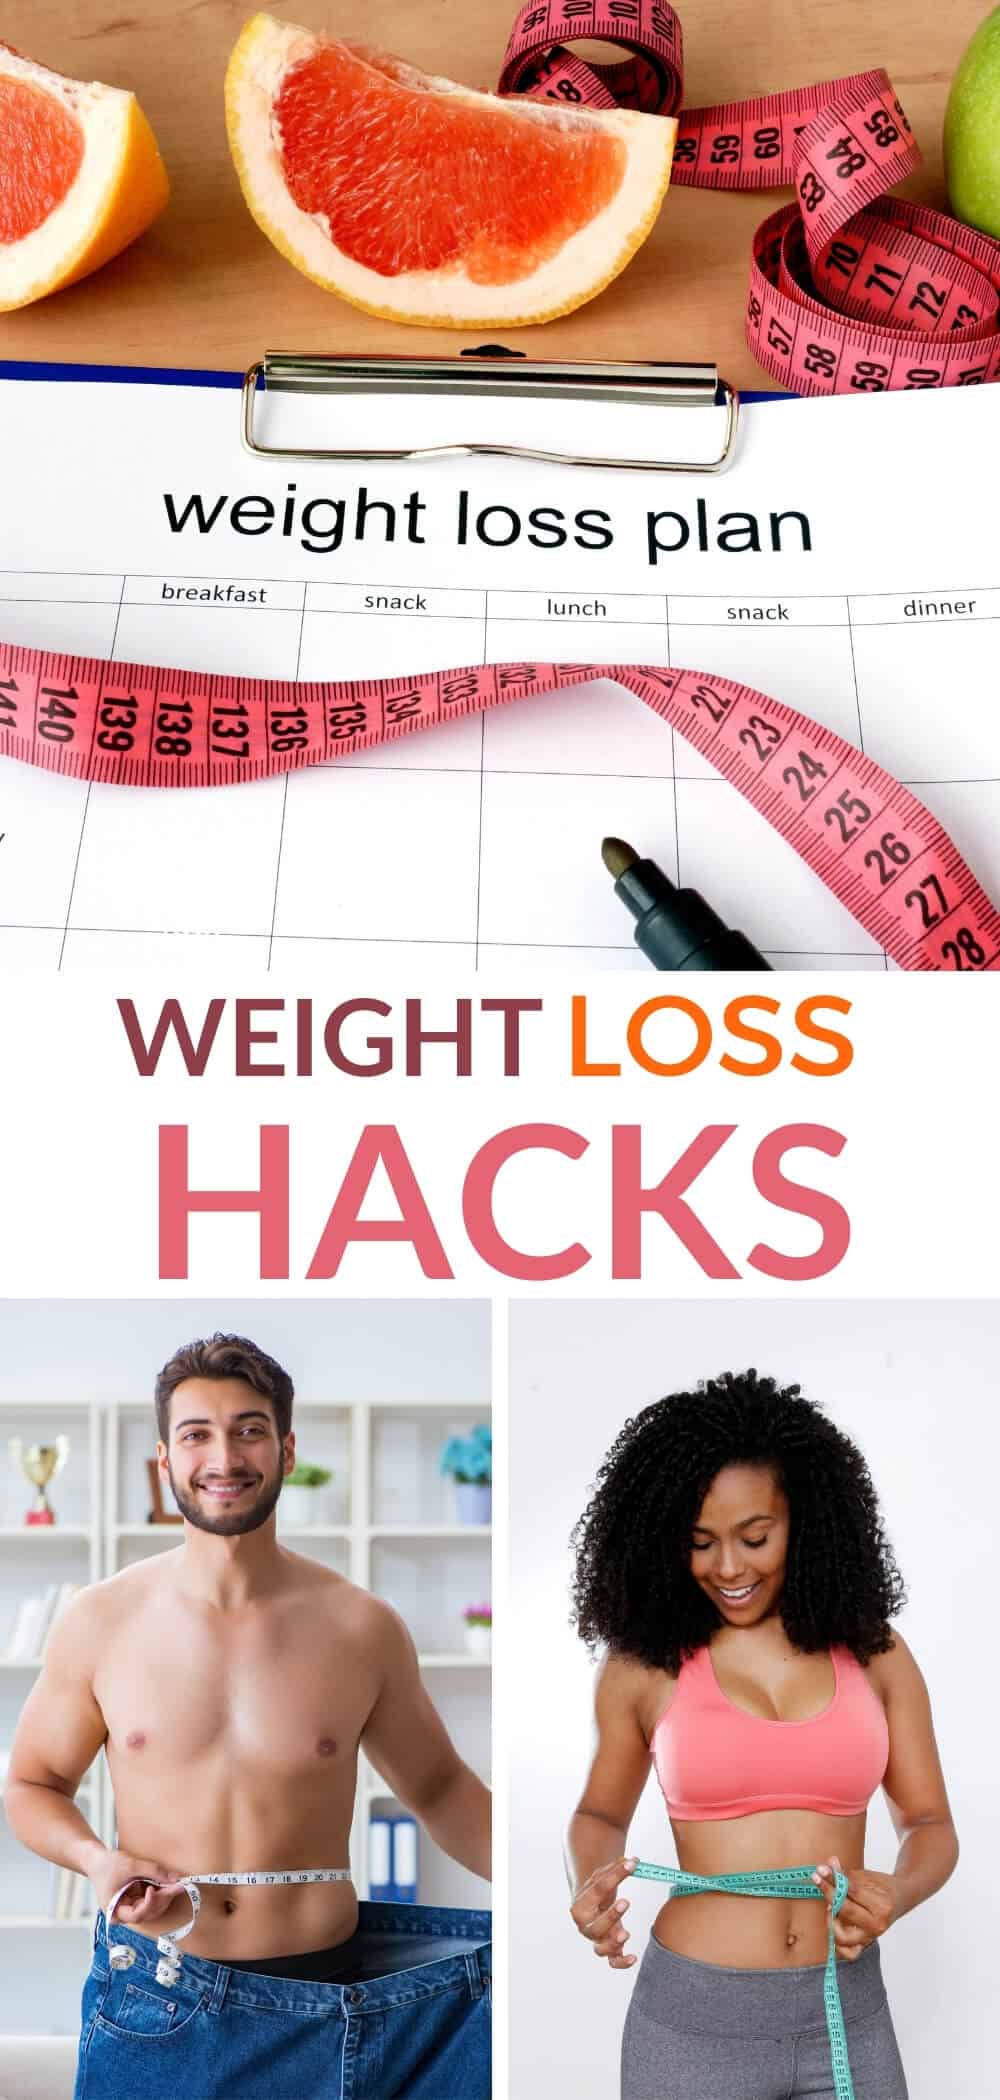 Weight Loss Hacks That Work And Help Keep Weight Off So Simple Ideas 6445